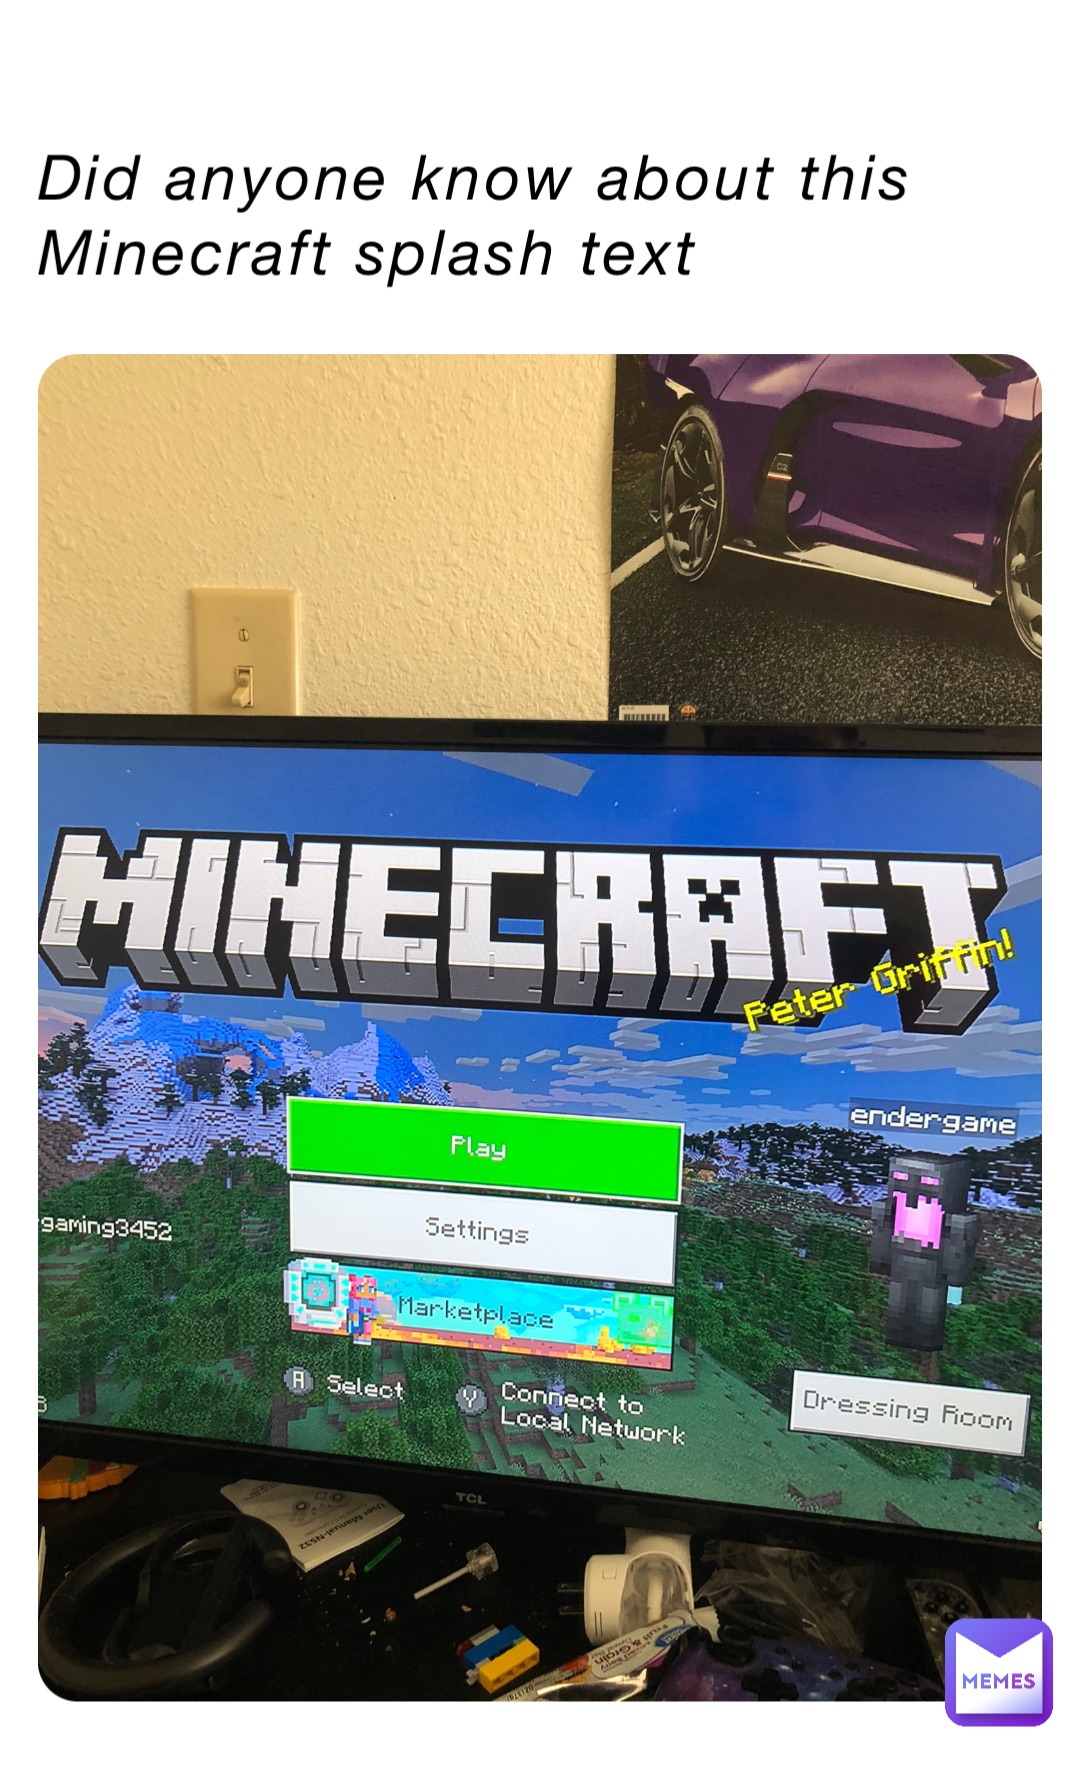 Did anyone know about this Minecraft splash text